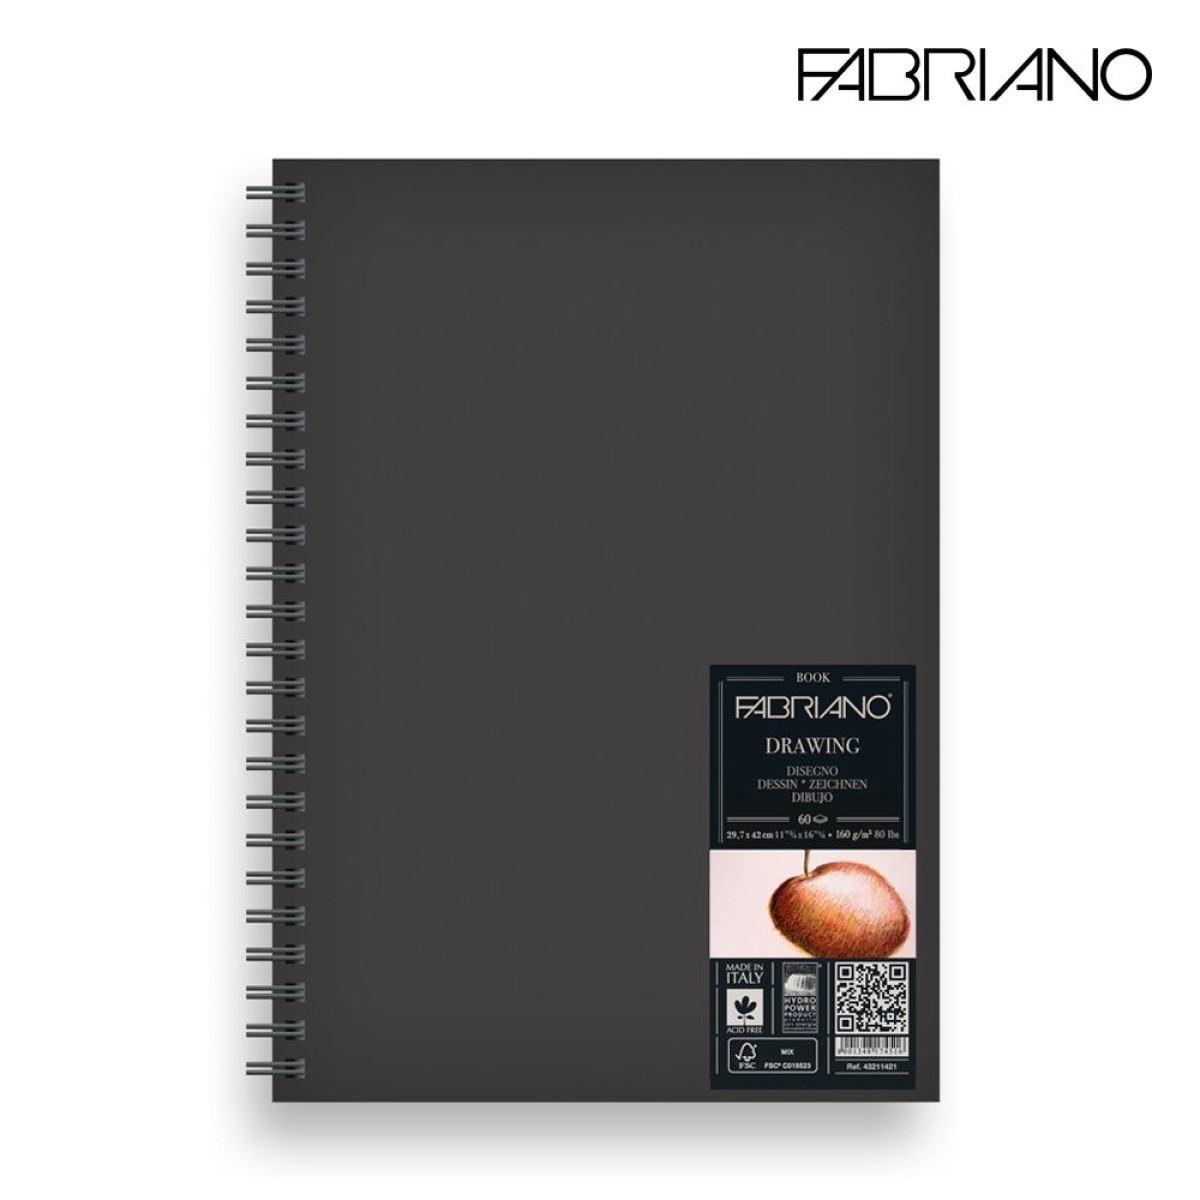 FABRIANO Drawing Book Σπιράλ Portrait A4 - 60 φύλλα / 160 gsm